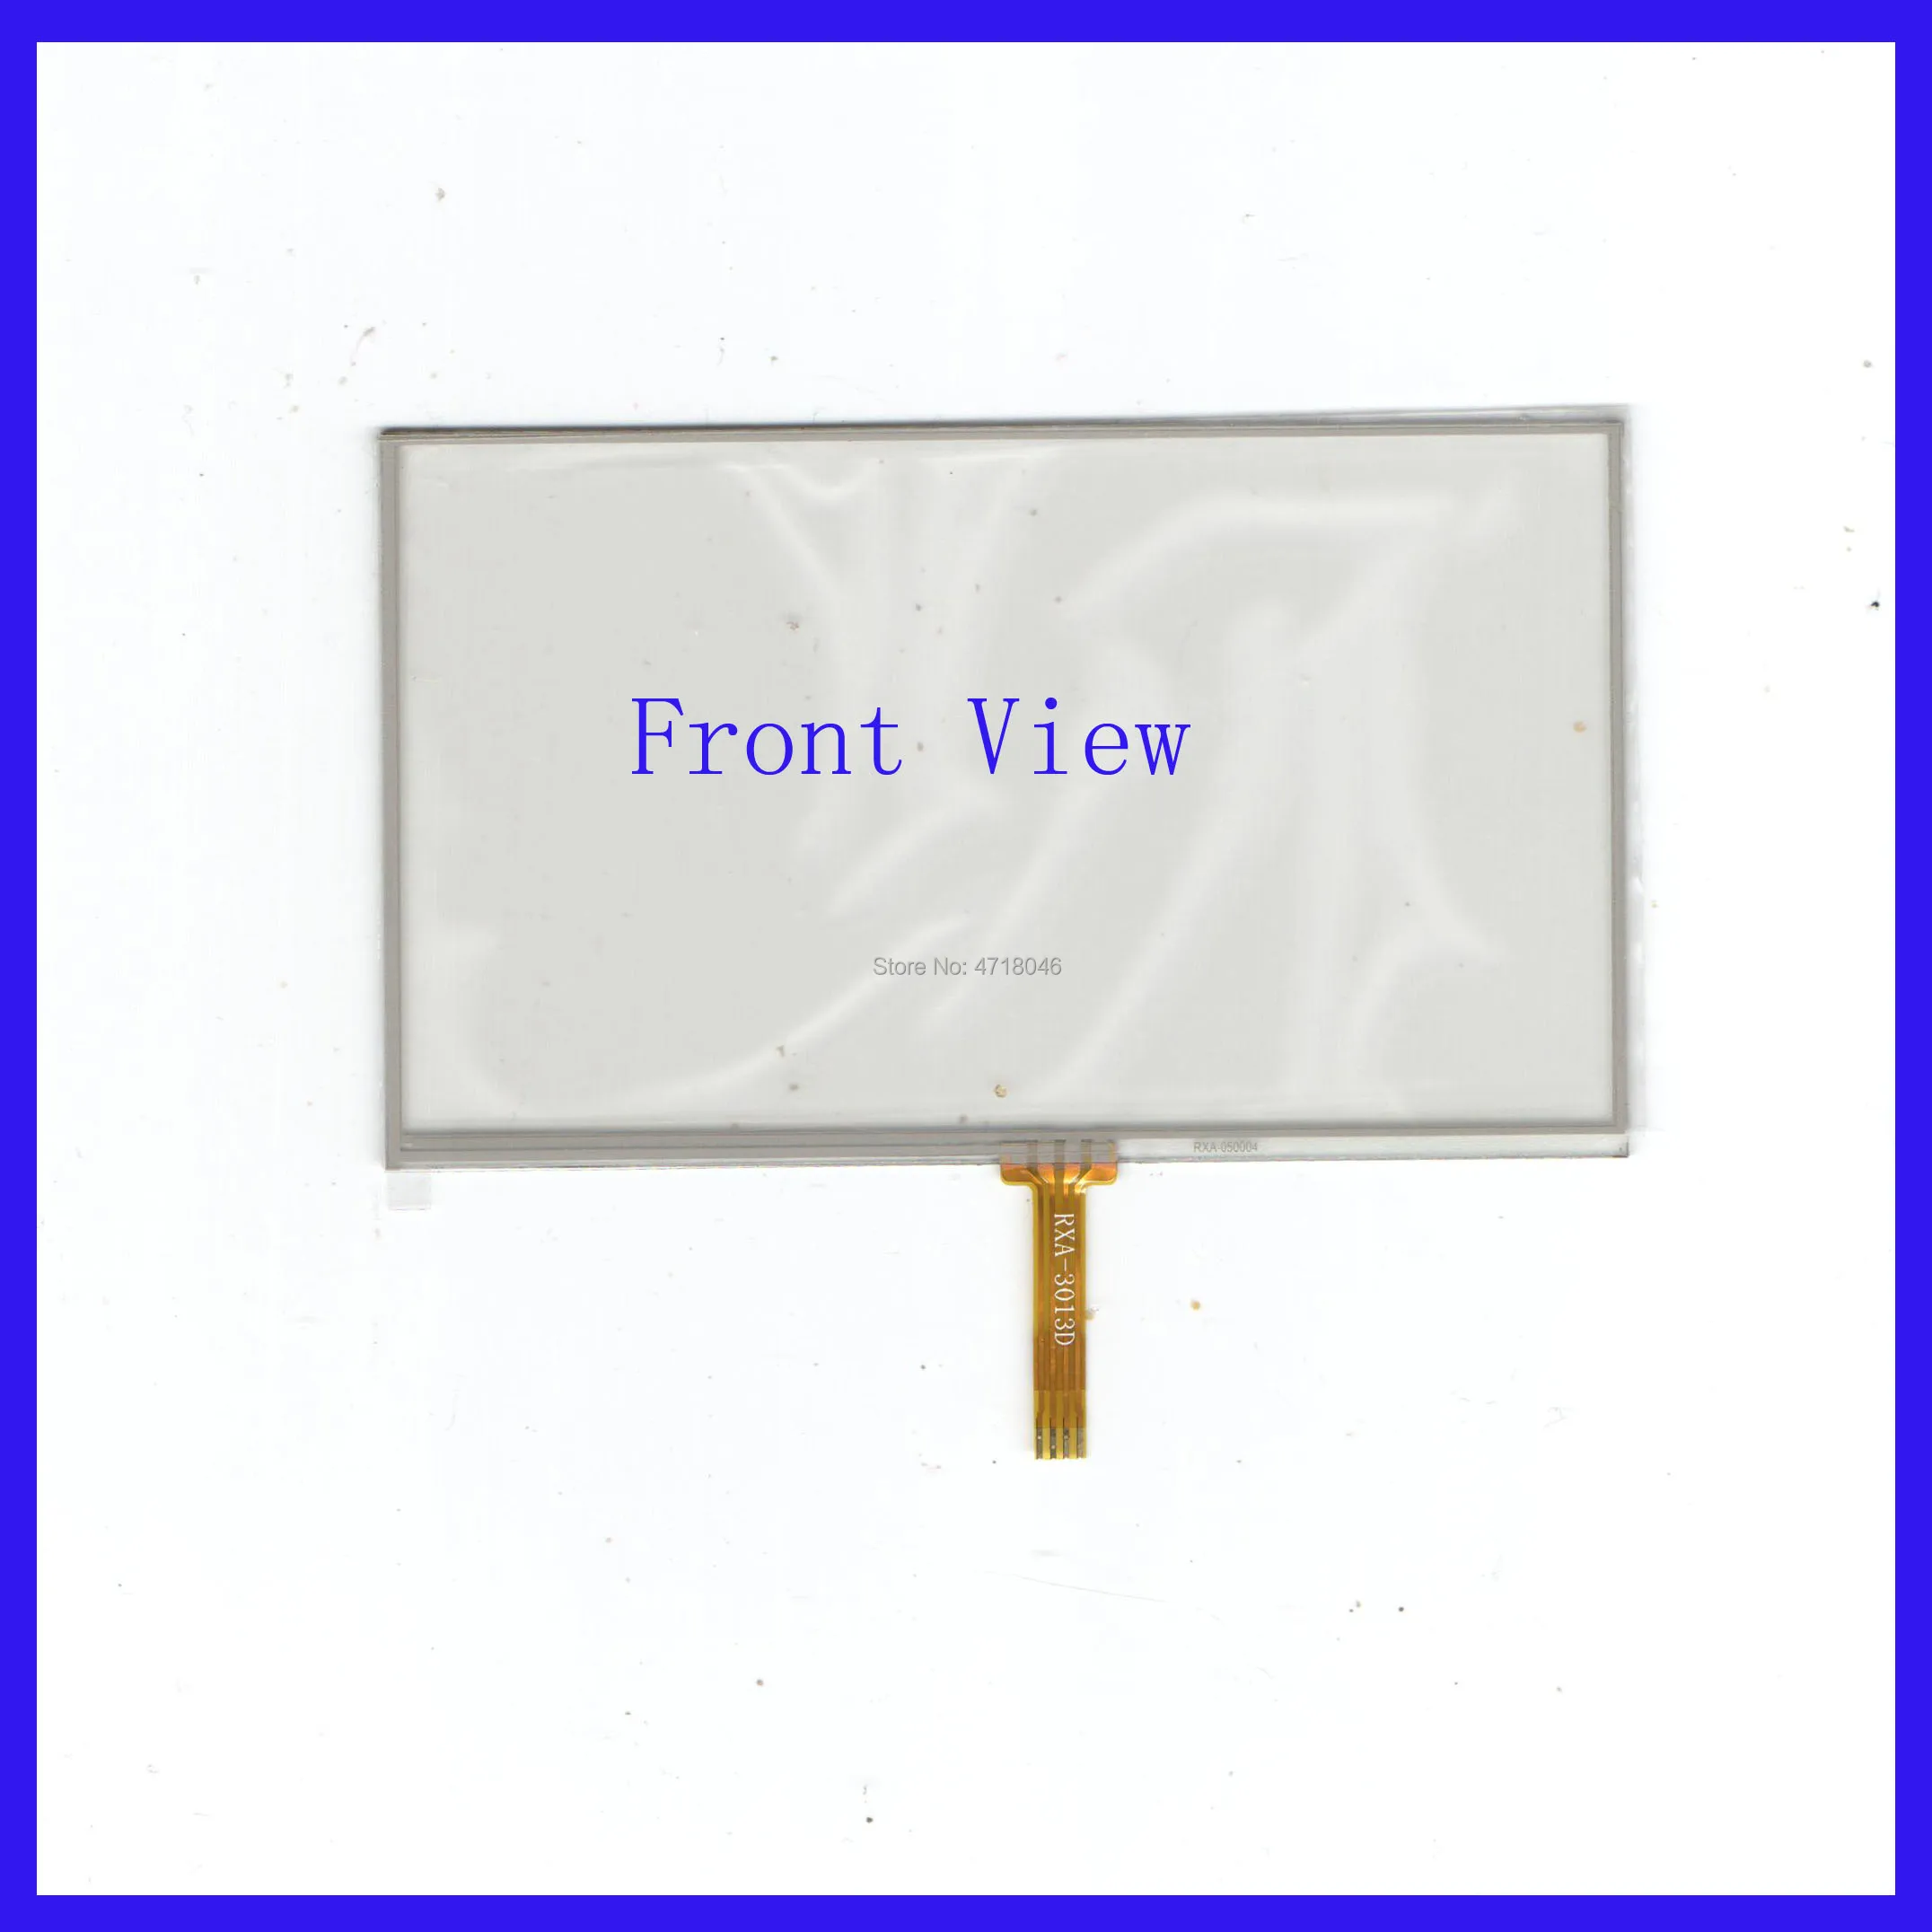 

ZYS forPrestigio forgeovision 5500 compatible touchglass 4lines resistance screen this is compatible Touchsensor